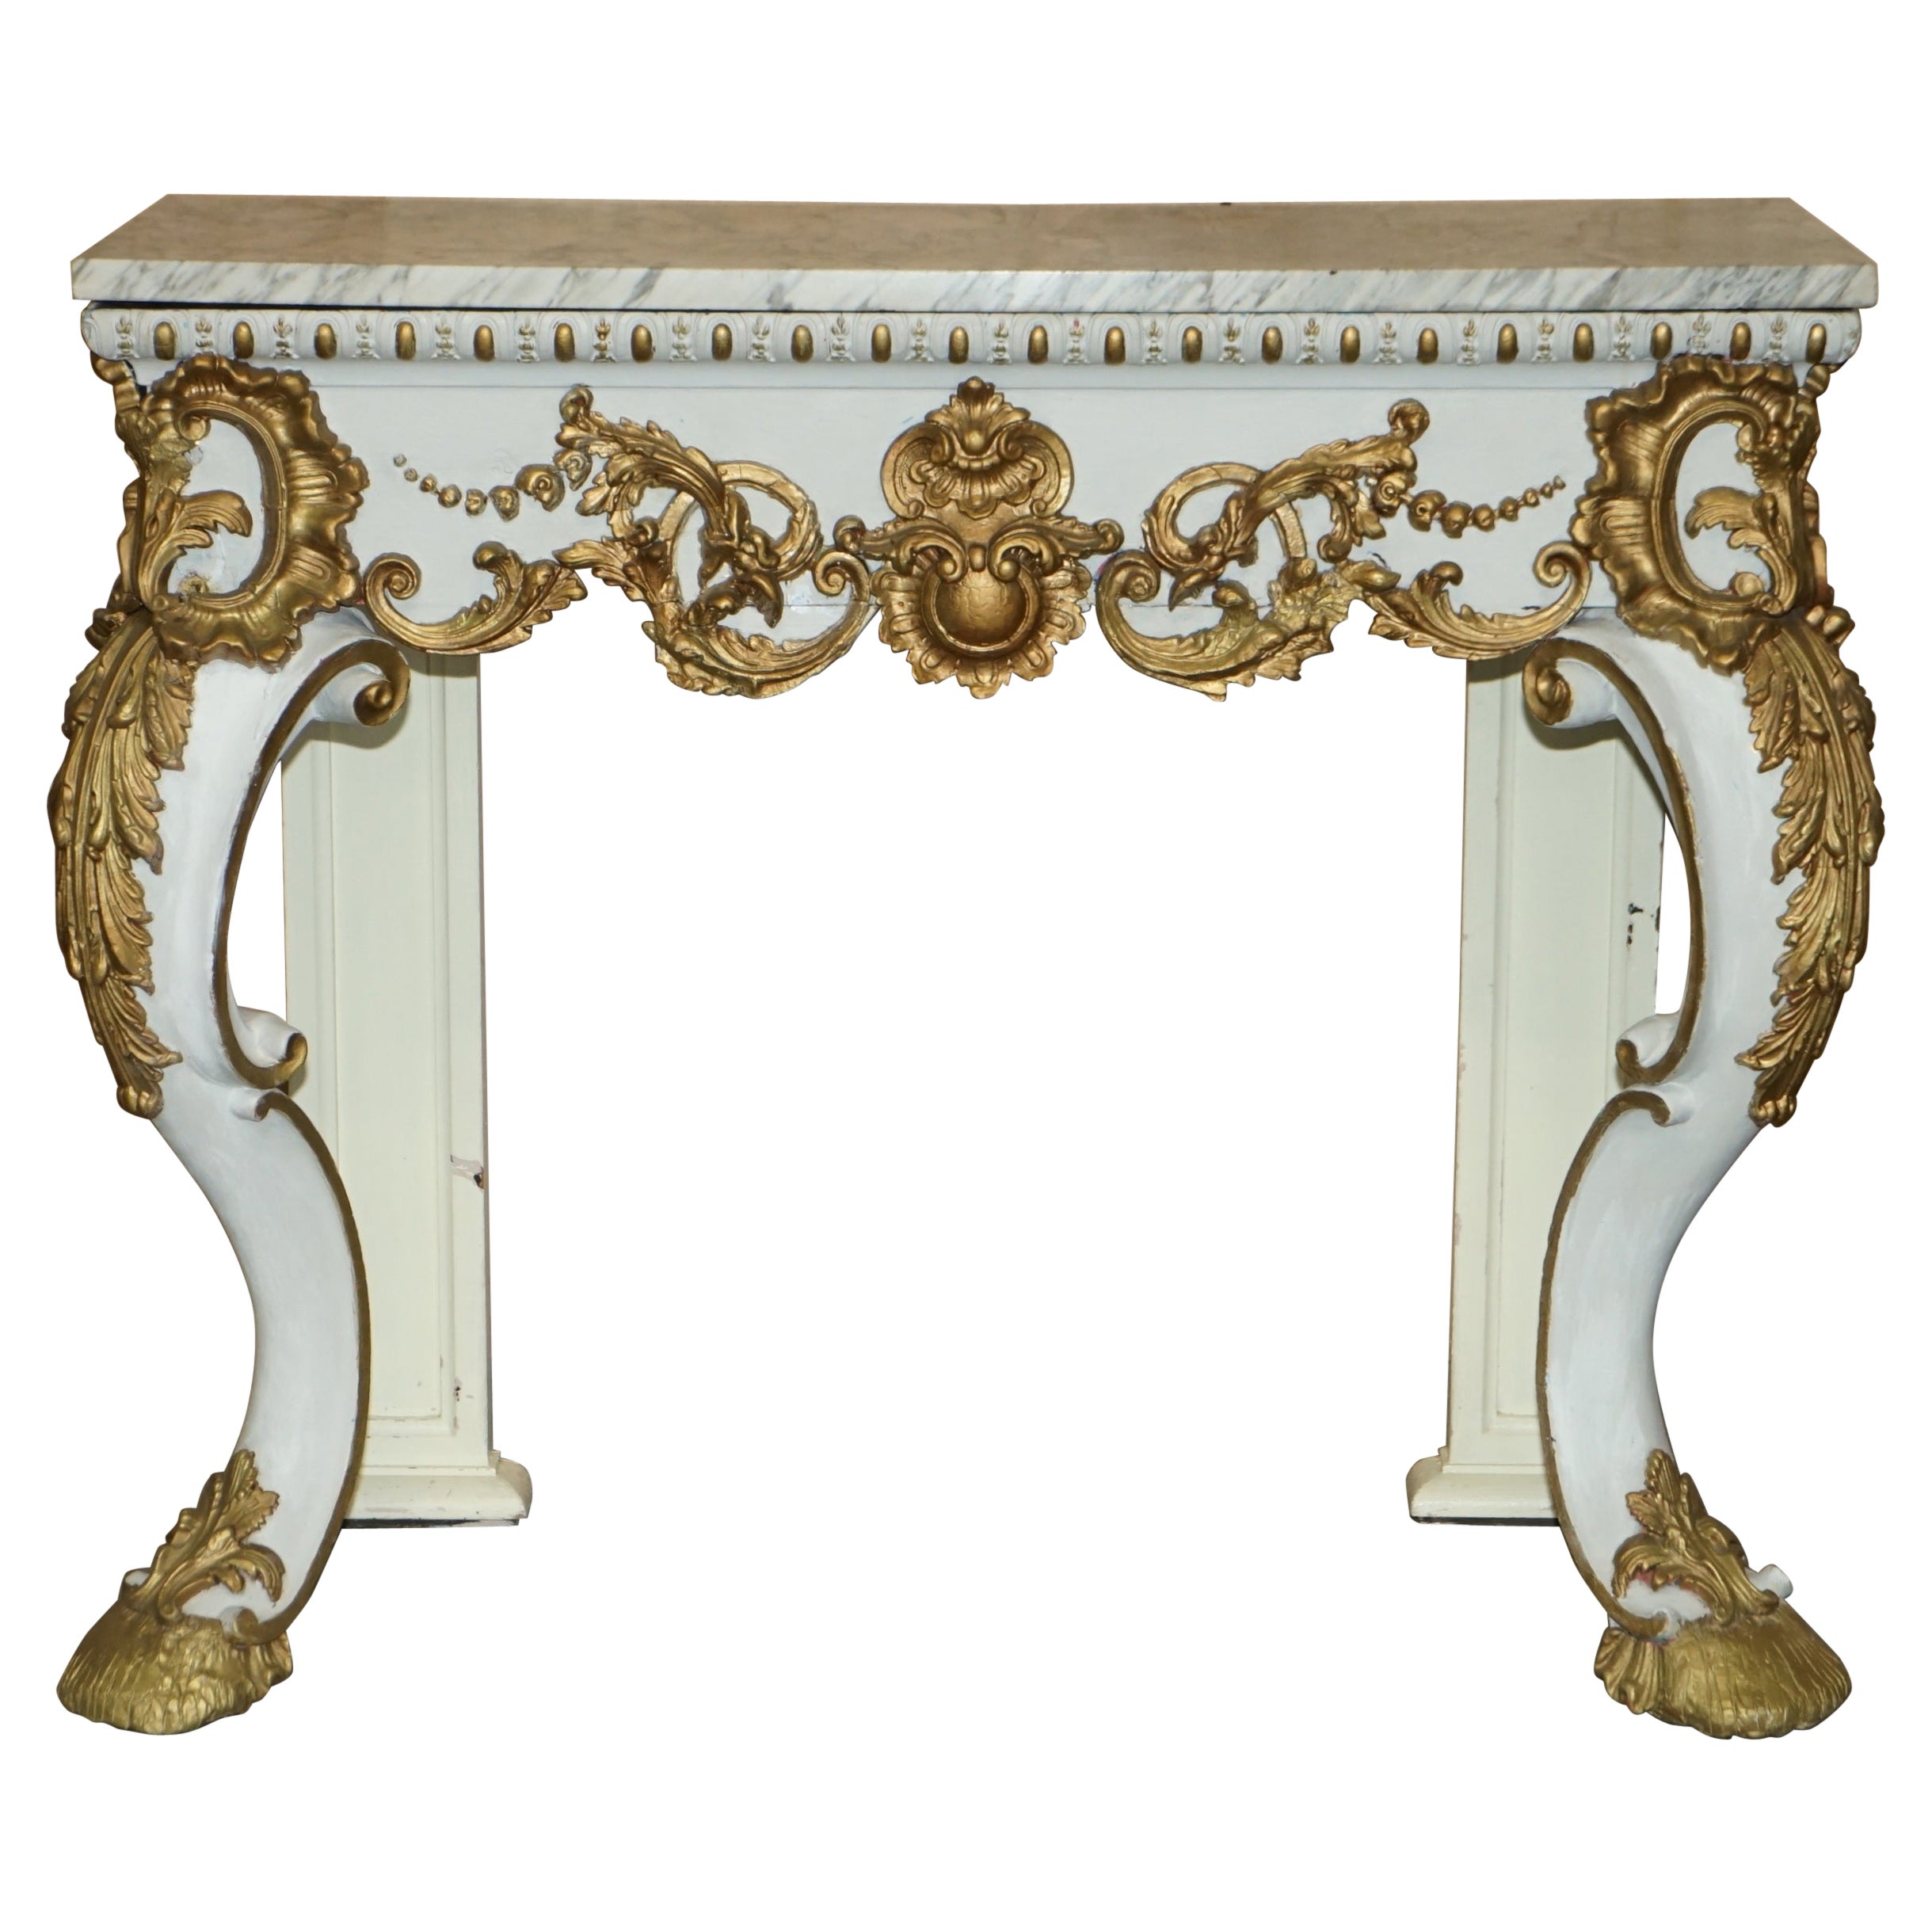 ANTIQUE ITALIAN HAND CARVED GiLTWOOD & MARBLE CONSOLE TABLE CIRCA 1860 VENICE For Sale